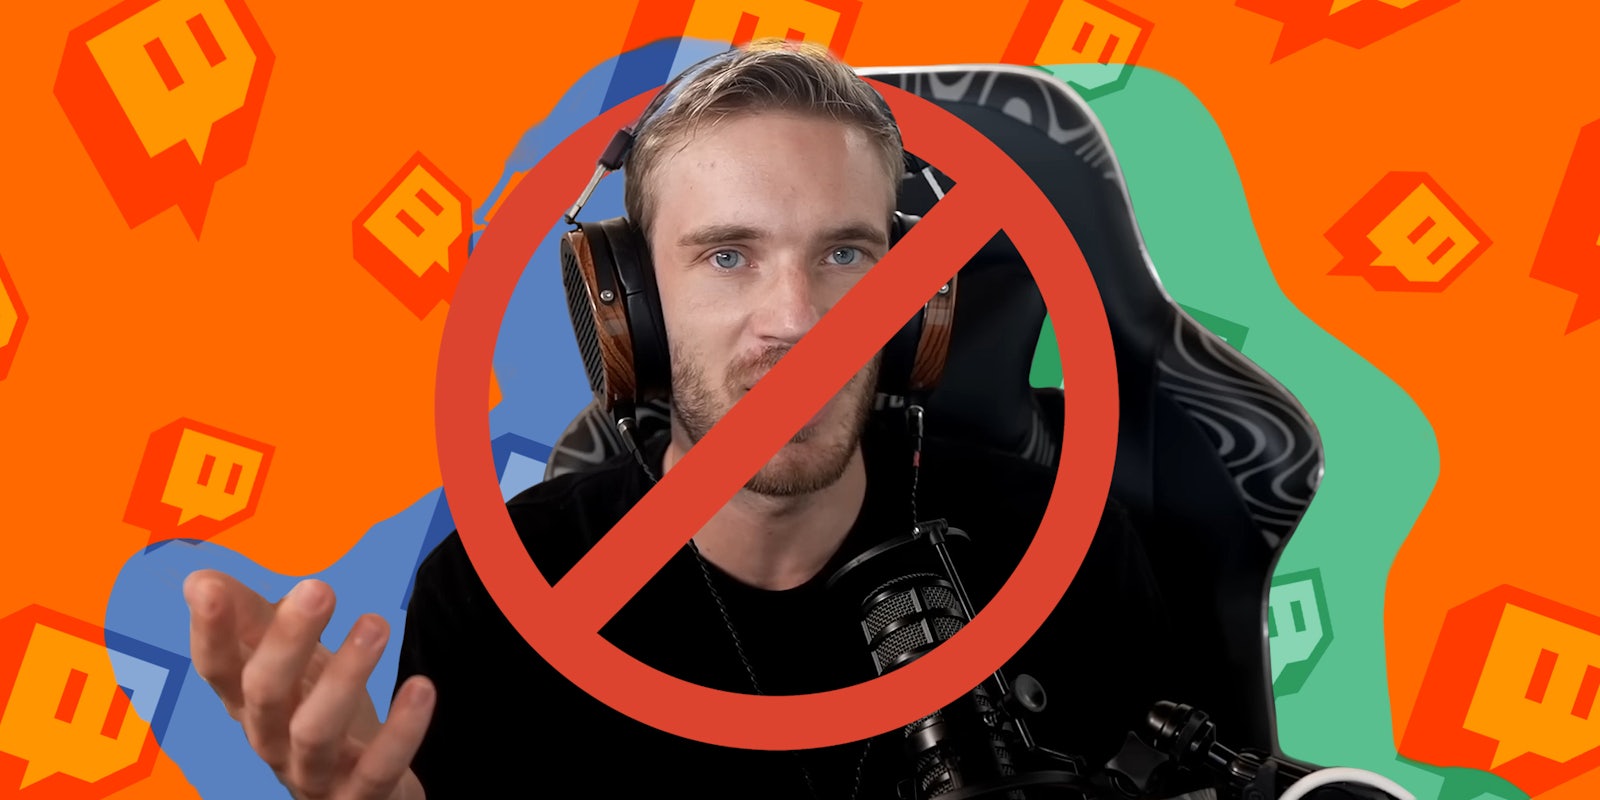 PewDiePie speaking with headphones on with red ban circle over face in front of orange and red Twitch logo background Passionfruit Remix